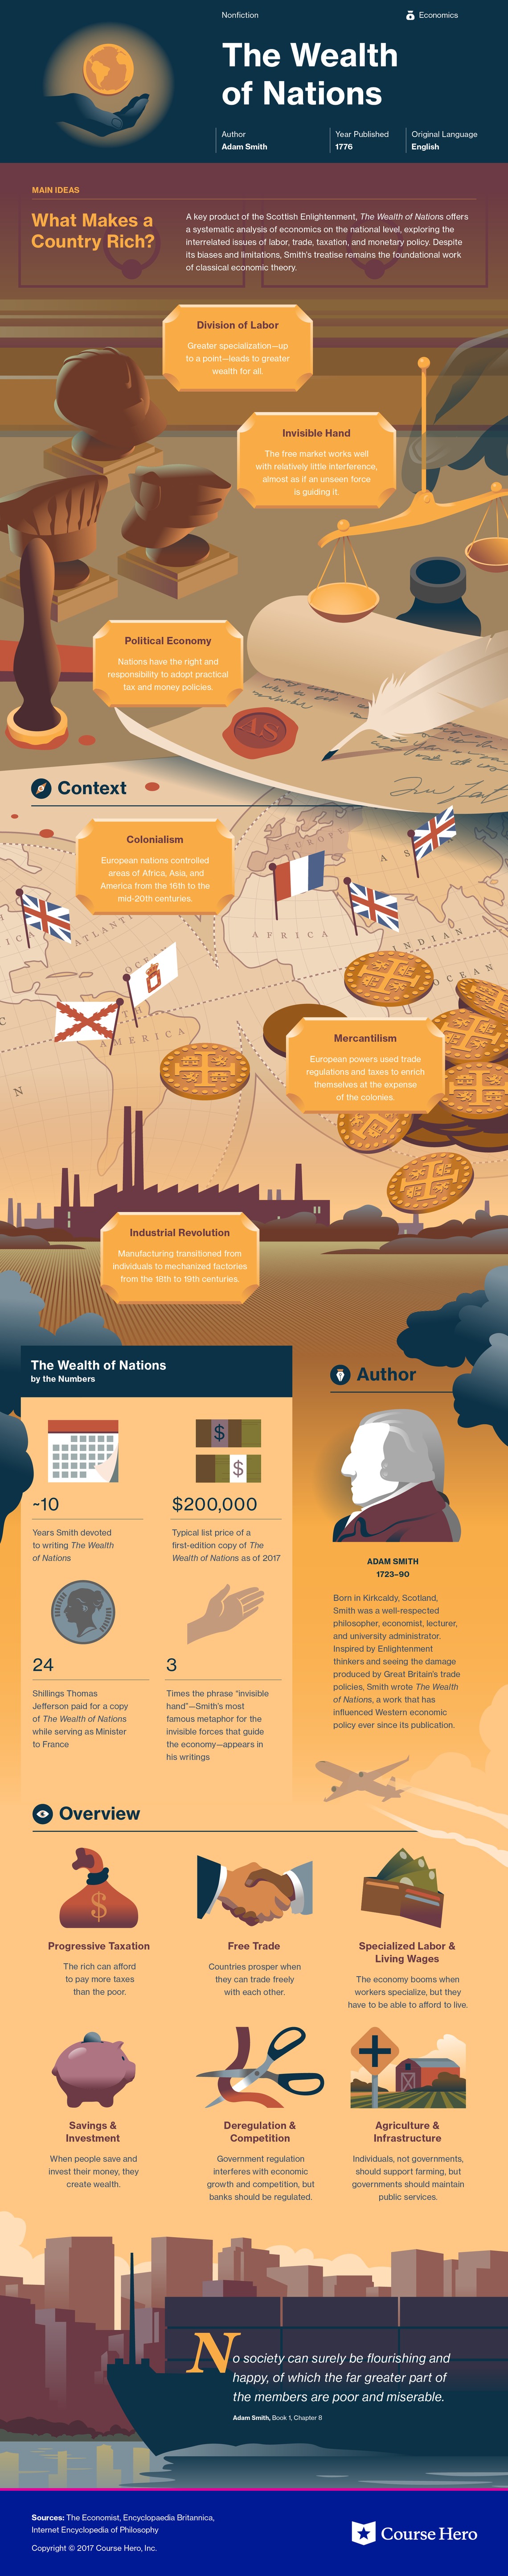 Wealth of Nations Infographic